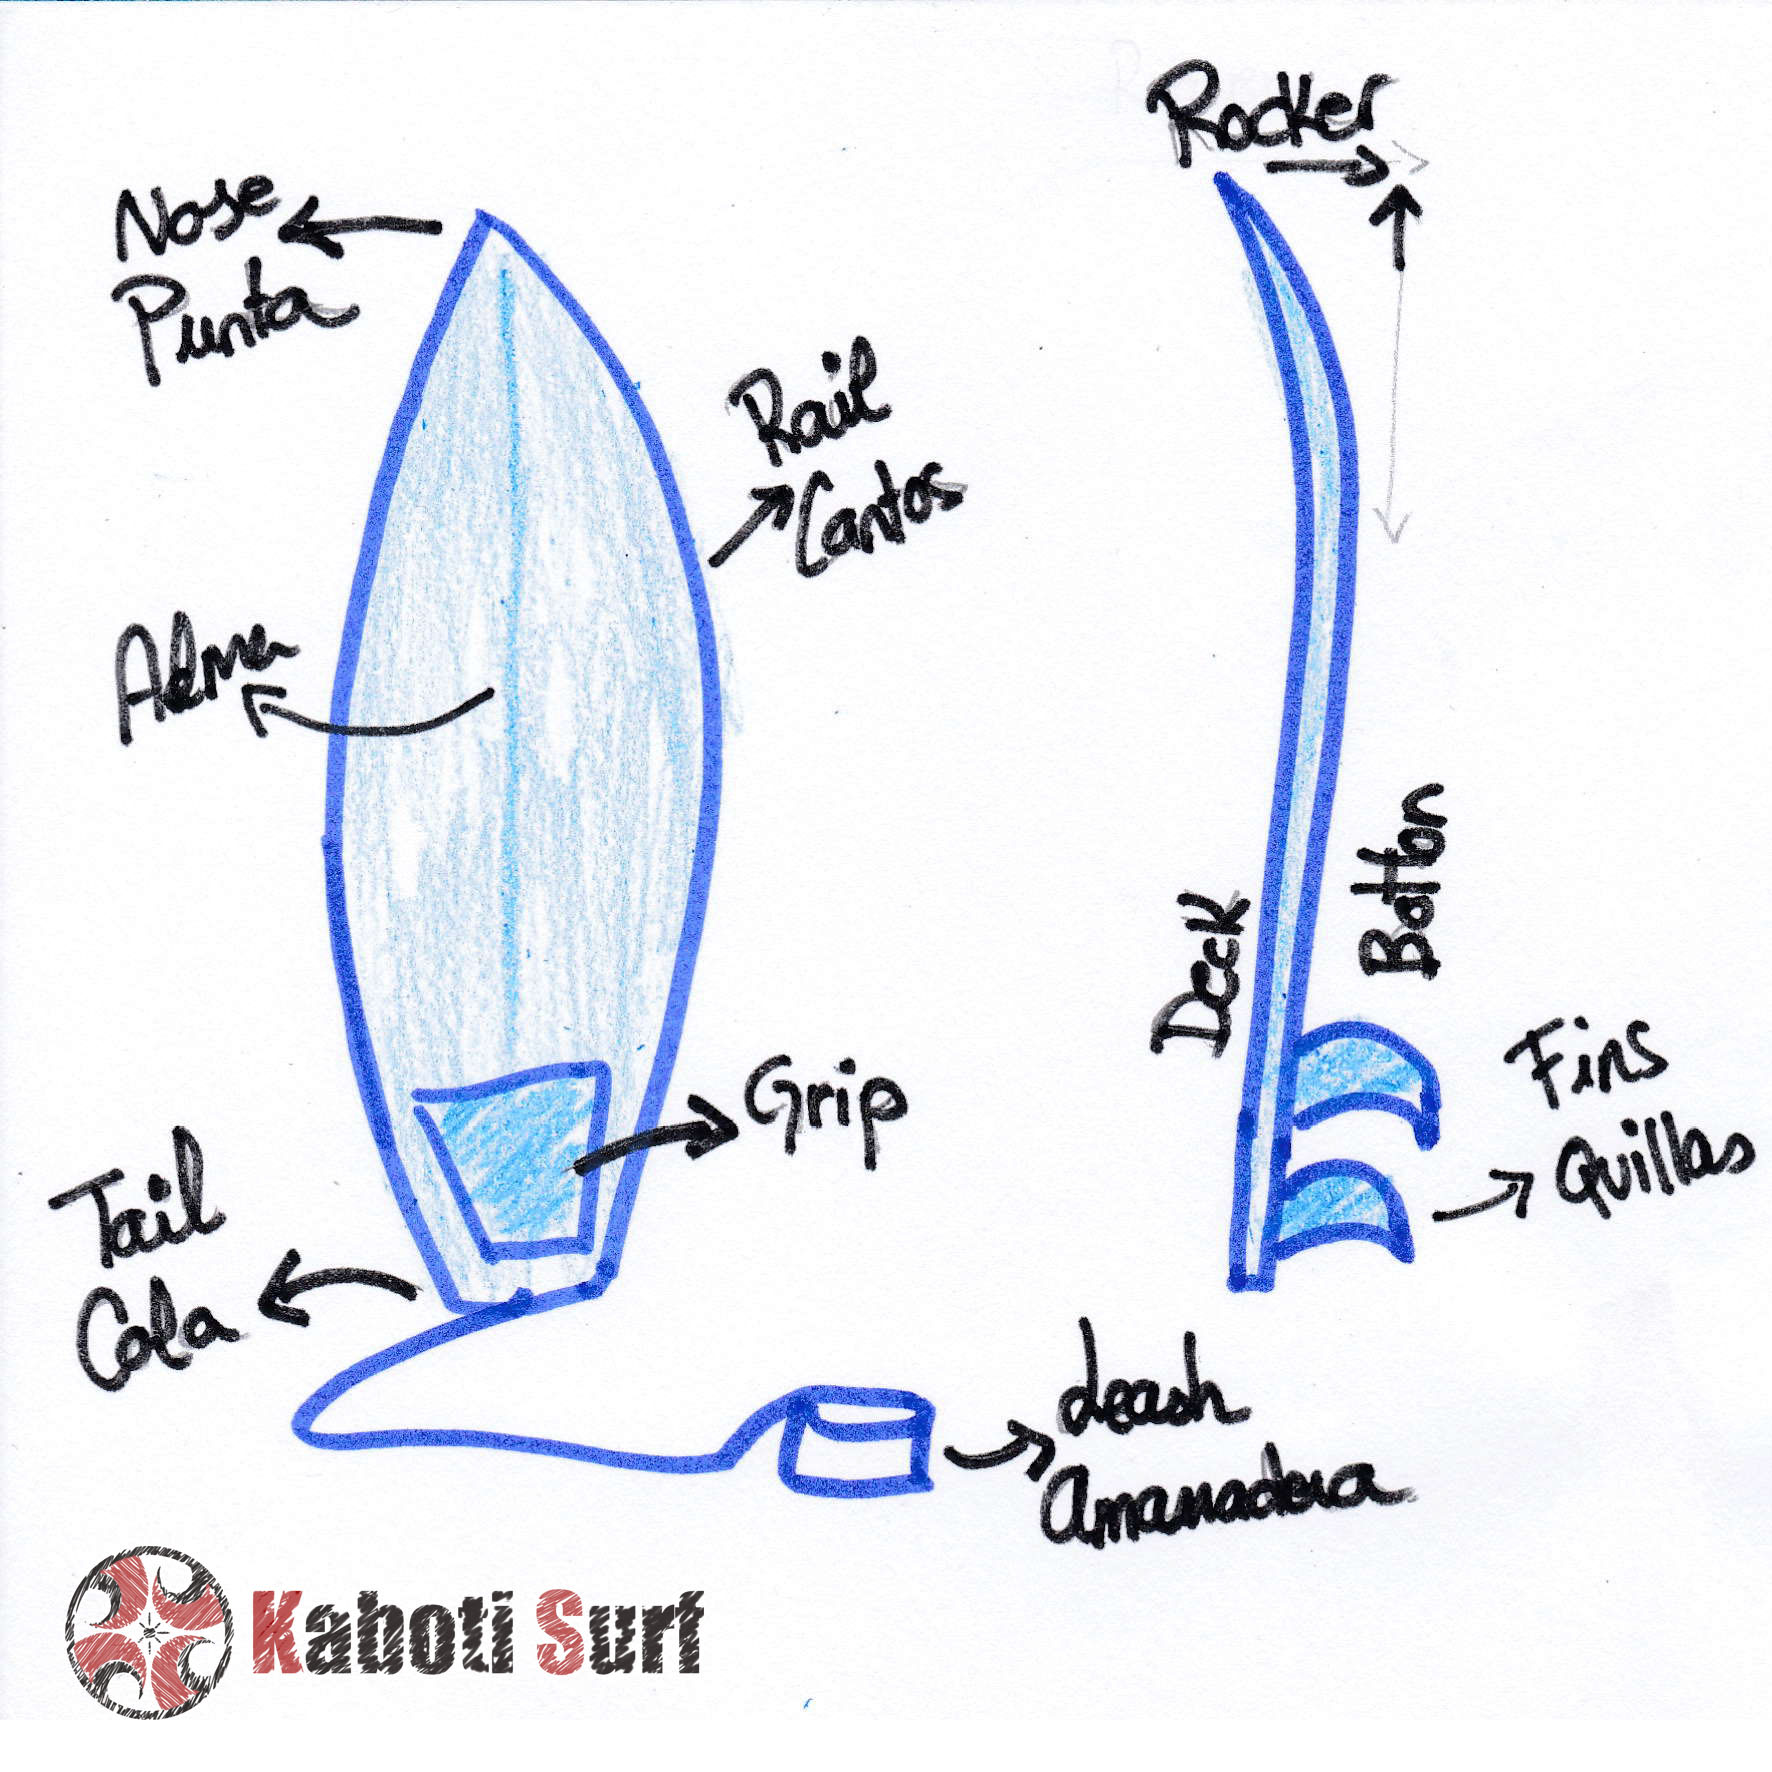 Parts of the surfboard